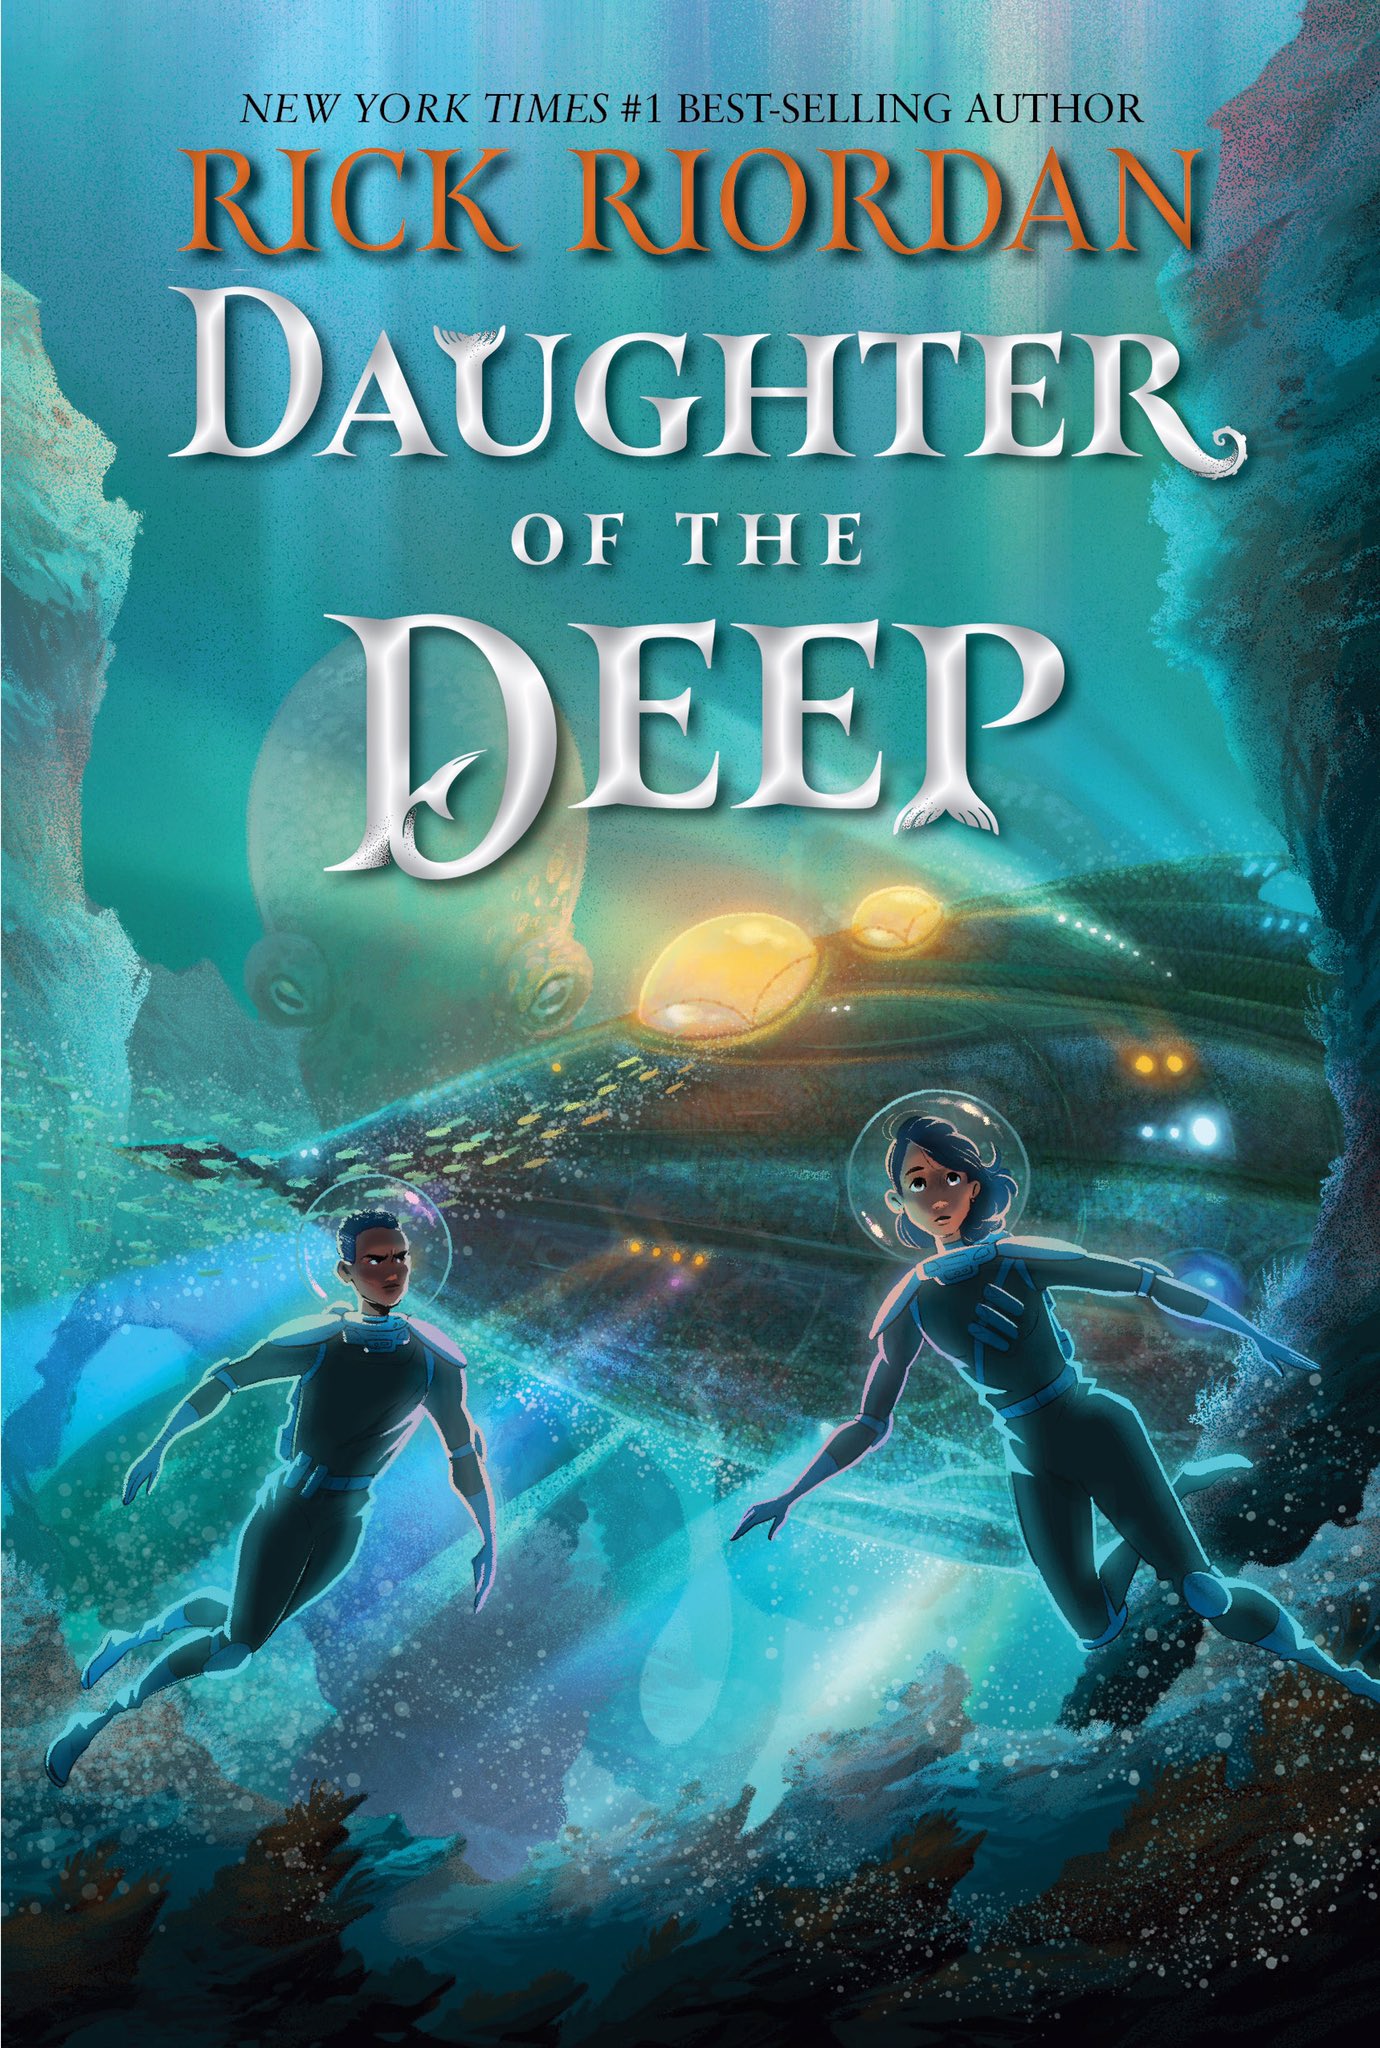 Rick Riordan “Daughter of the Deep” Book Discussion – Book Signing Central